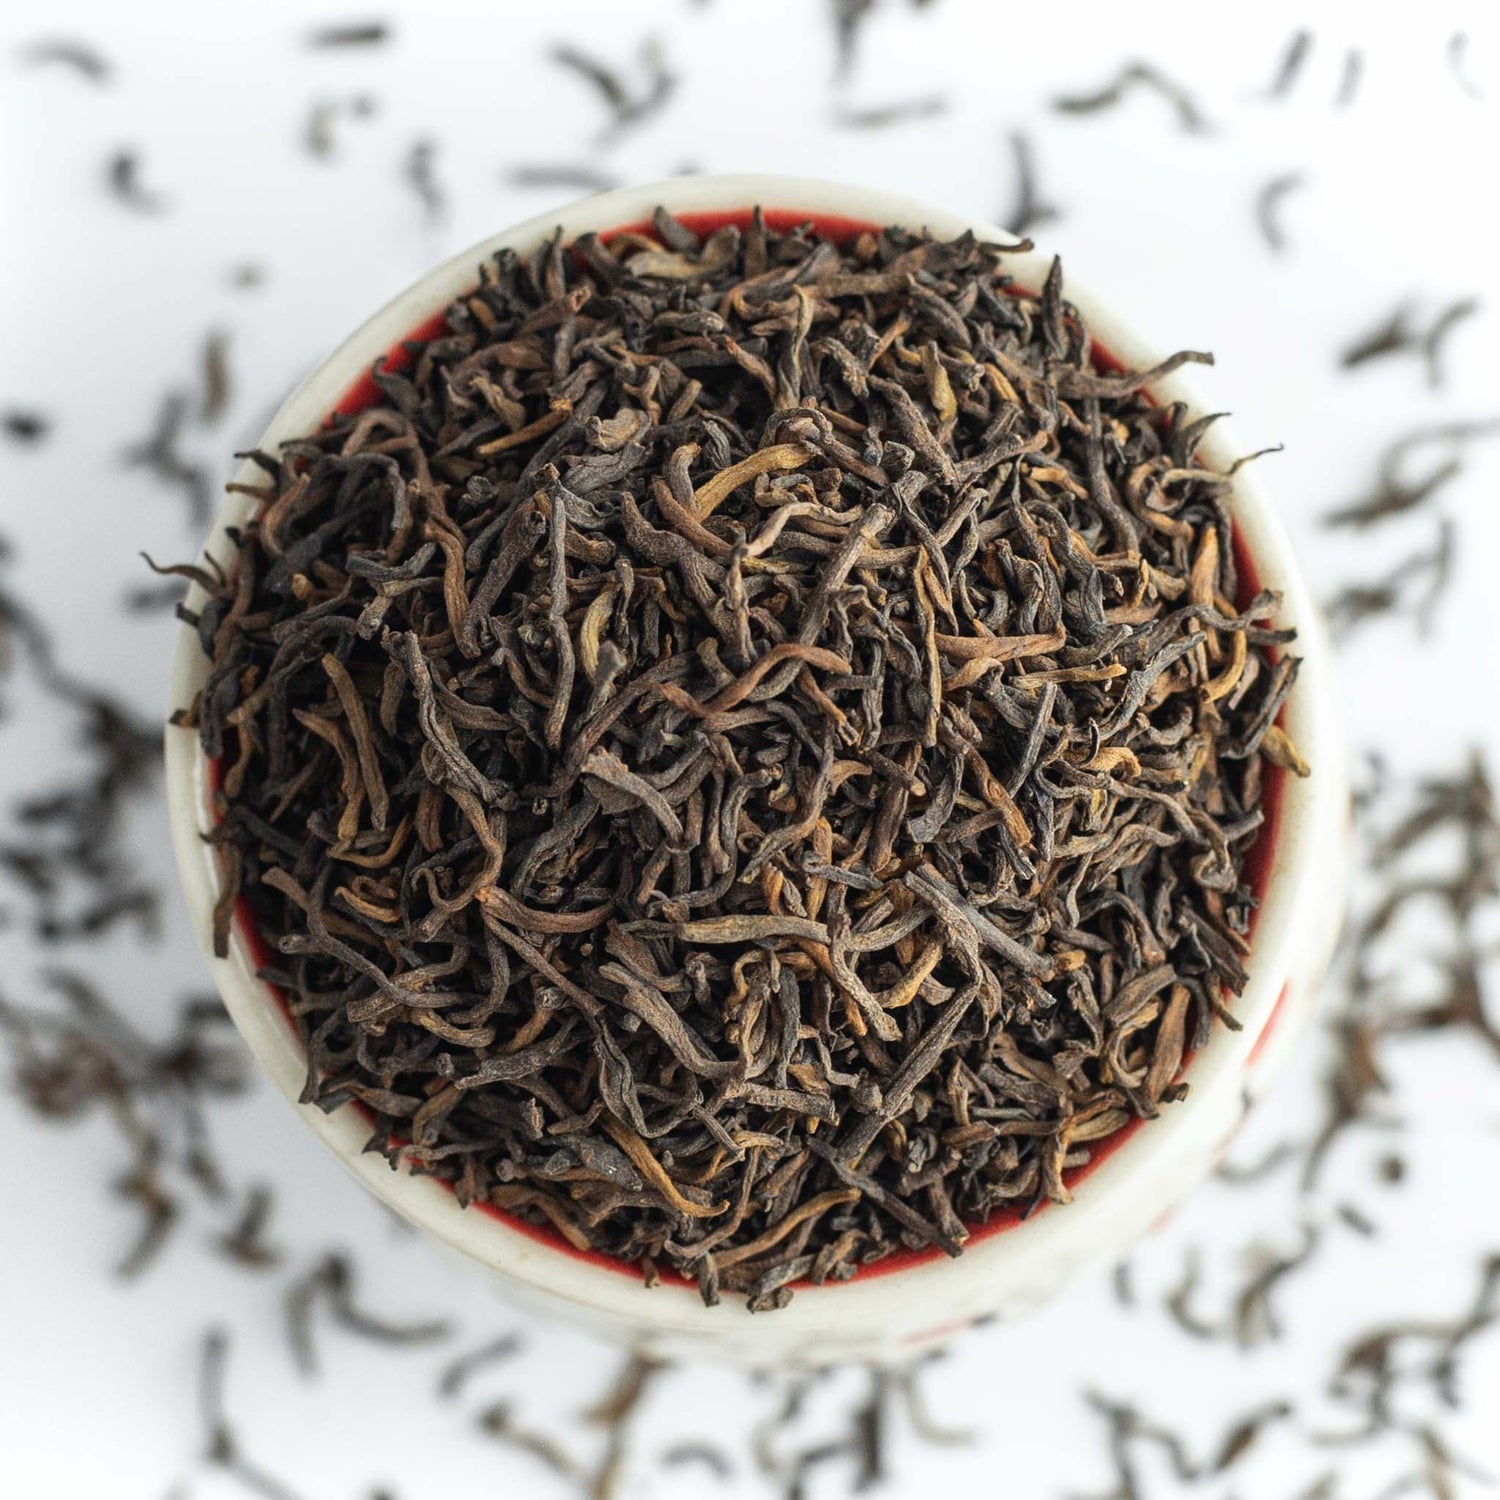 Dried tea leaves in white bowl.